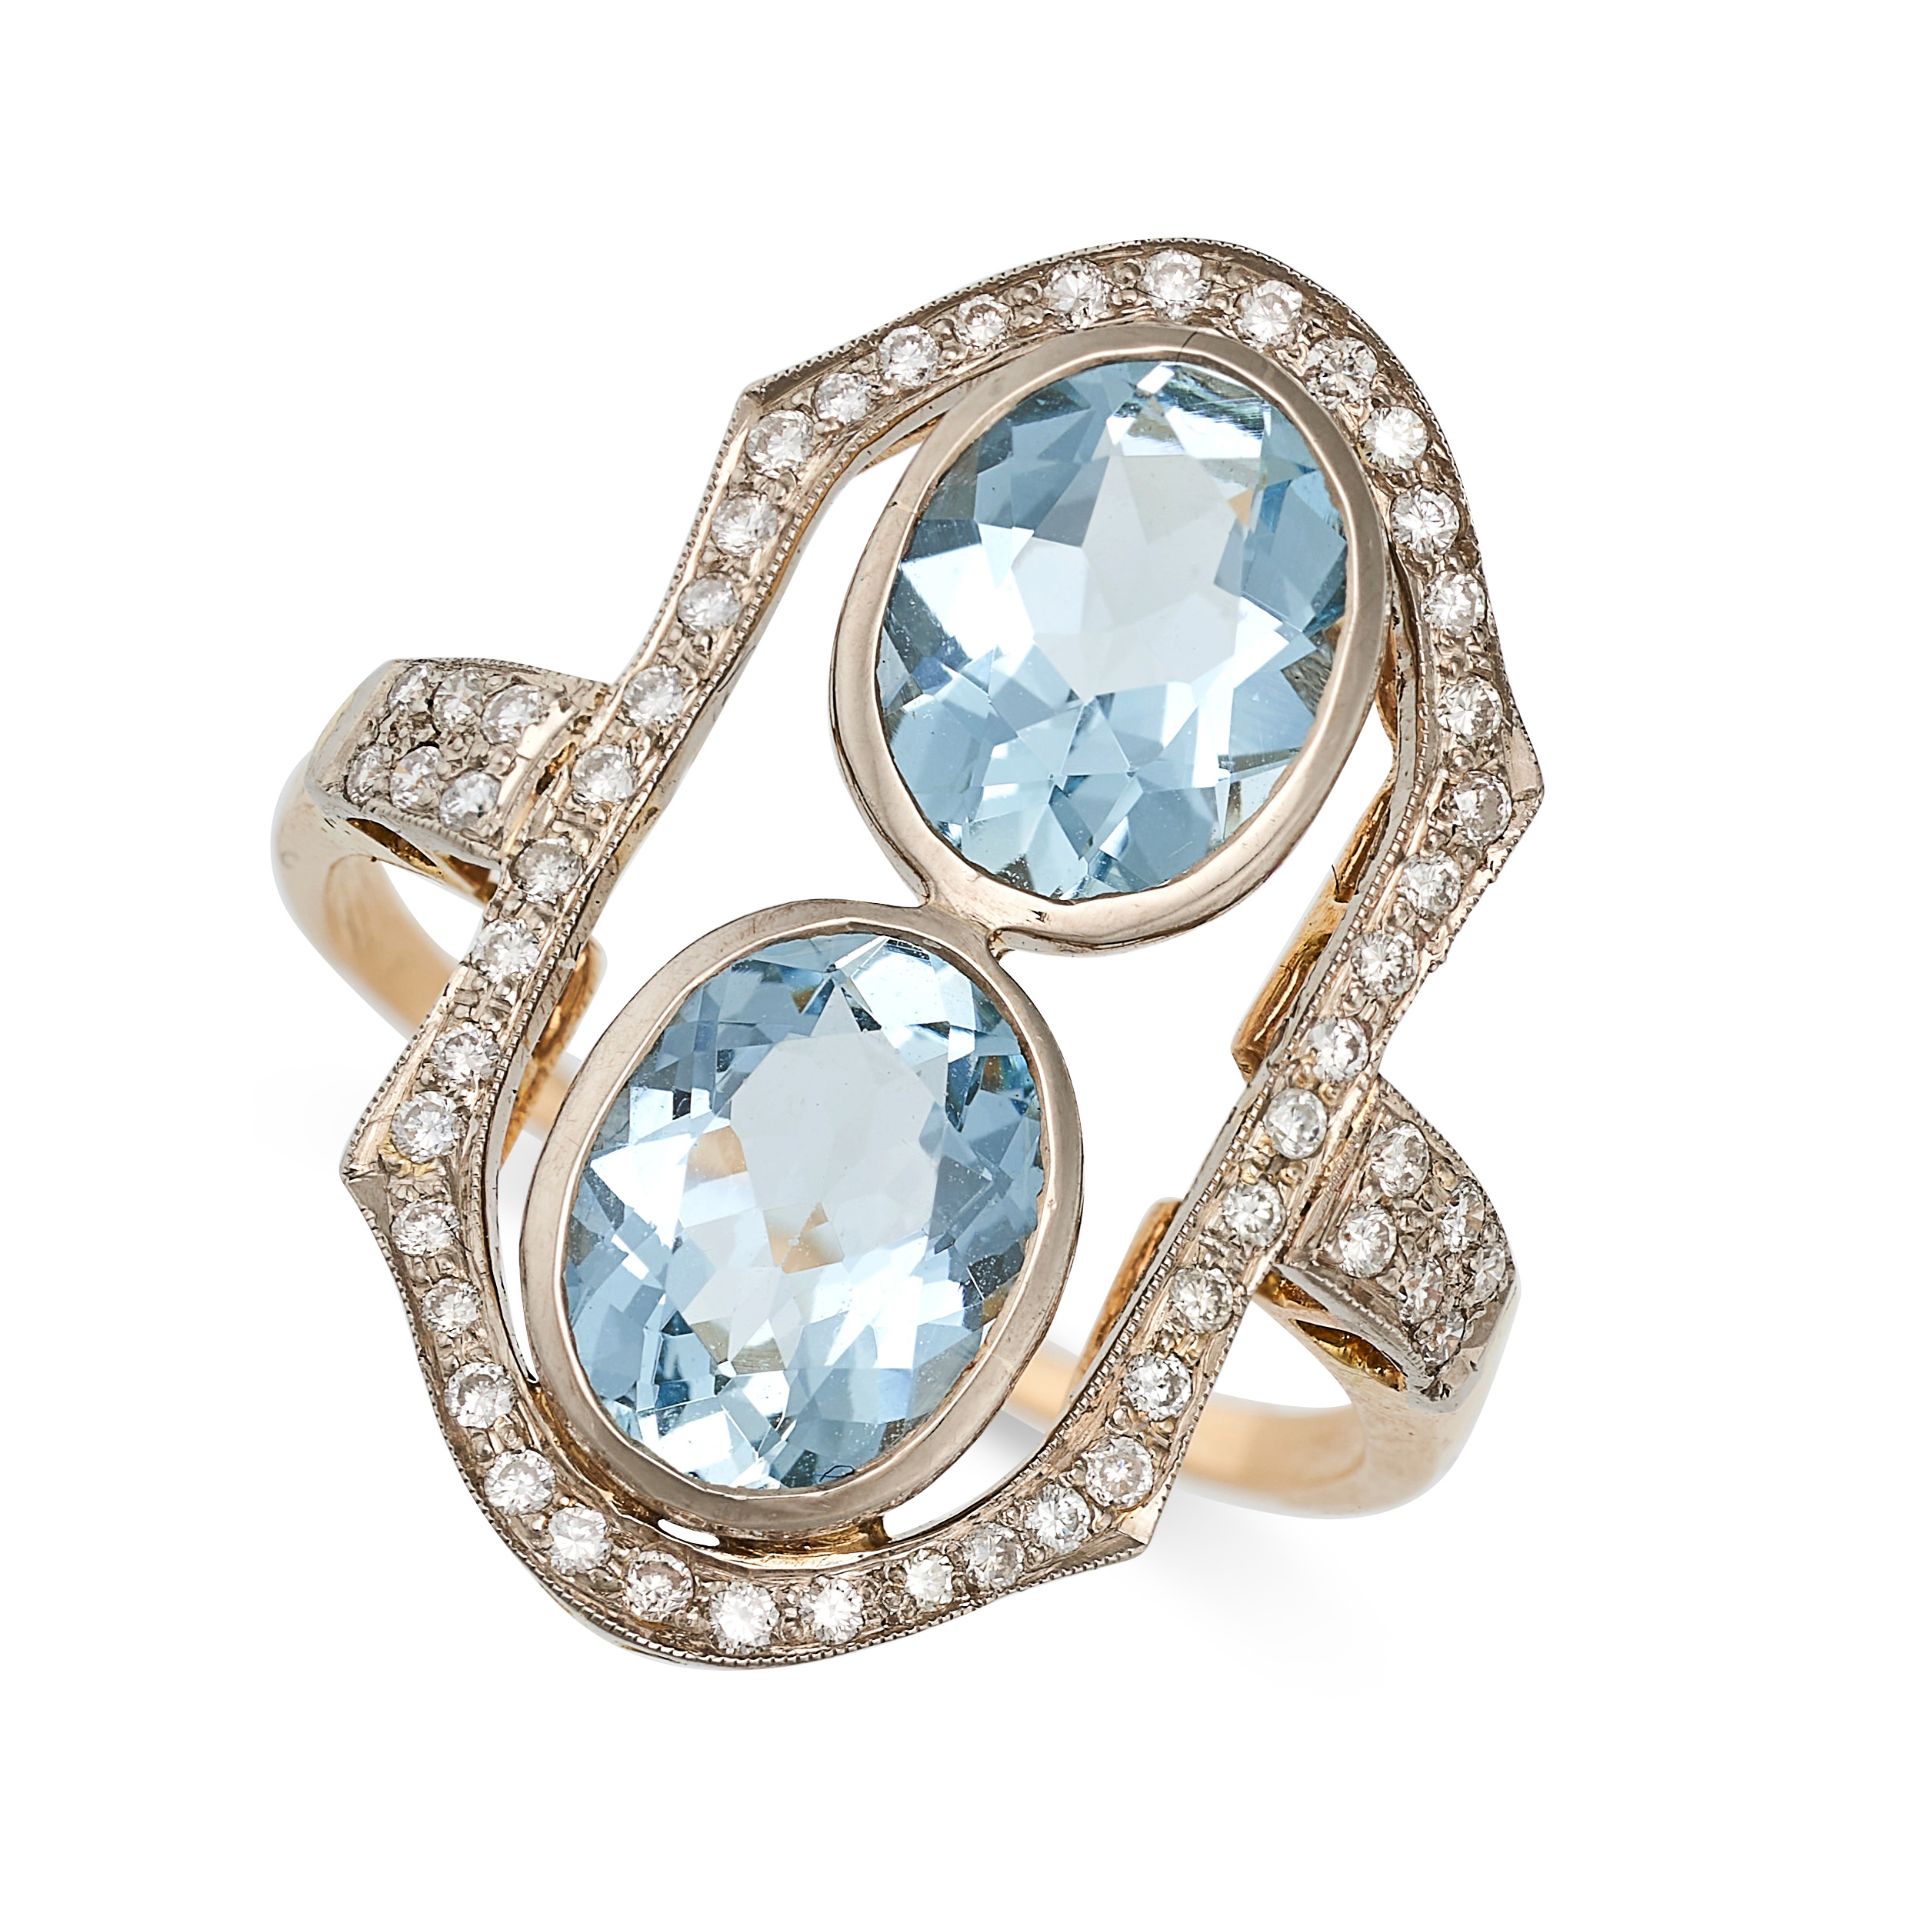 AN AQUAMARINE AND DIAMOND DRESS RING in 18ct rose gold, set with two oval cut aquamarines in a st...